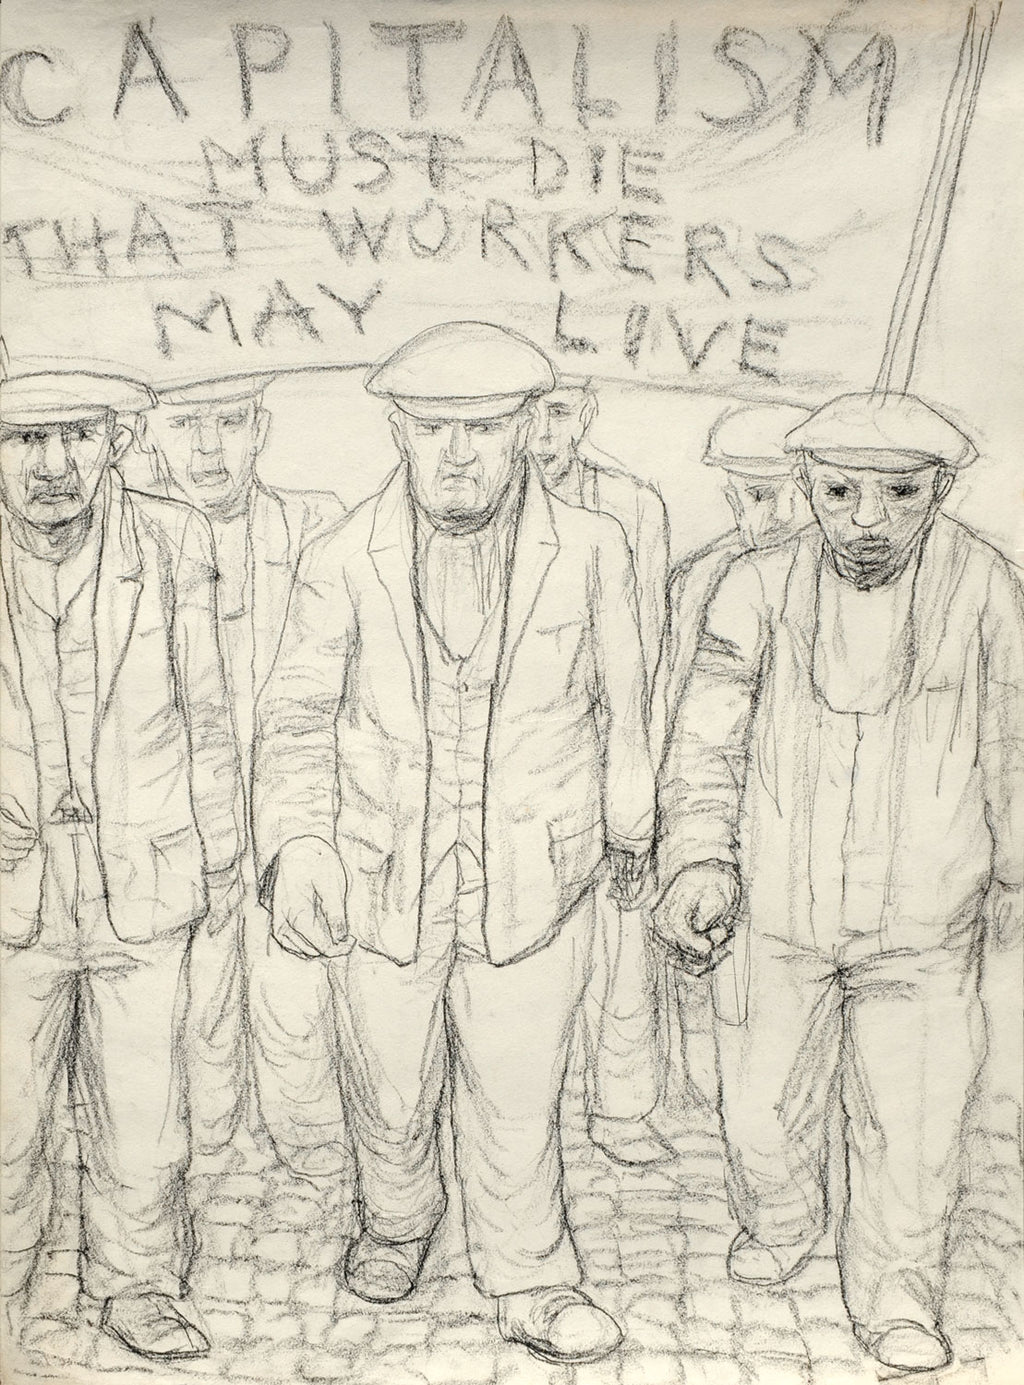 Workers May Live